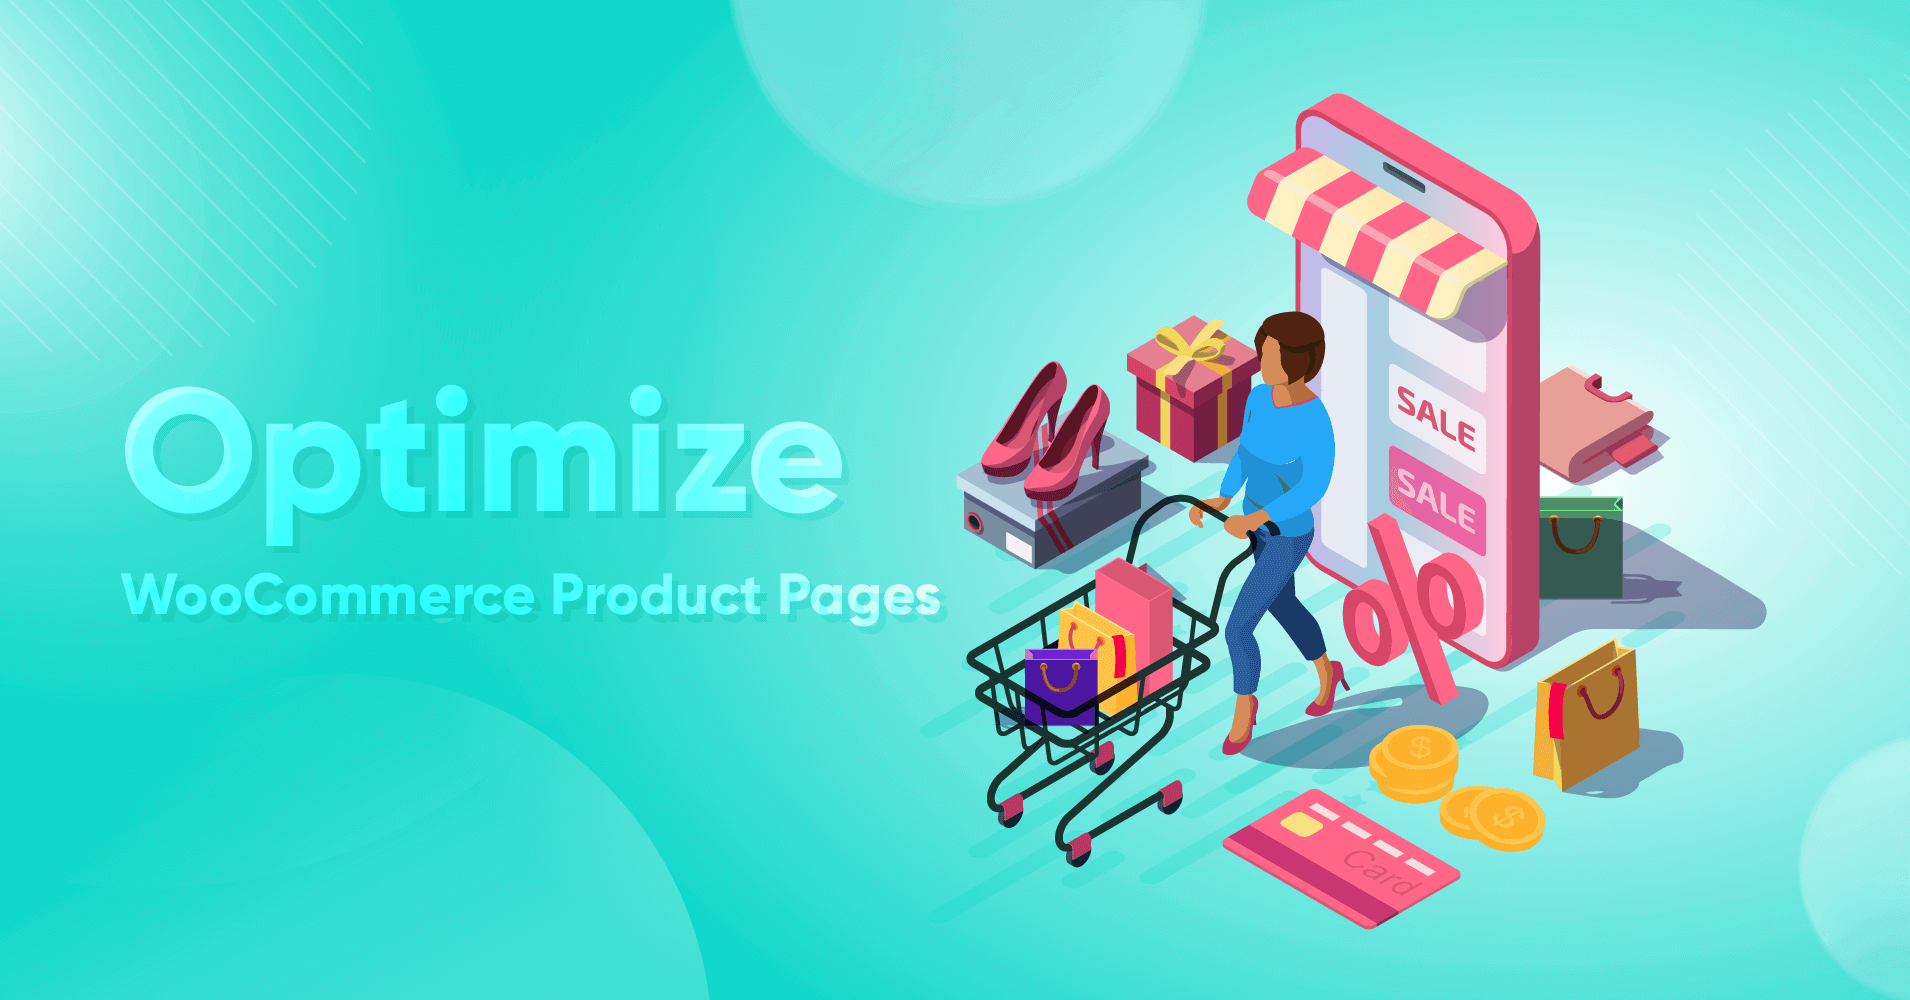 6 Strategies to Optimize WooCommerce Product Page To Drive More Sales